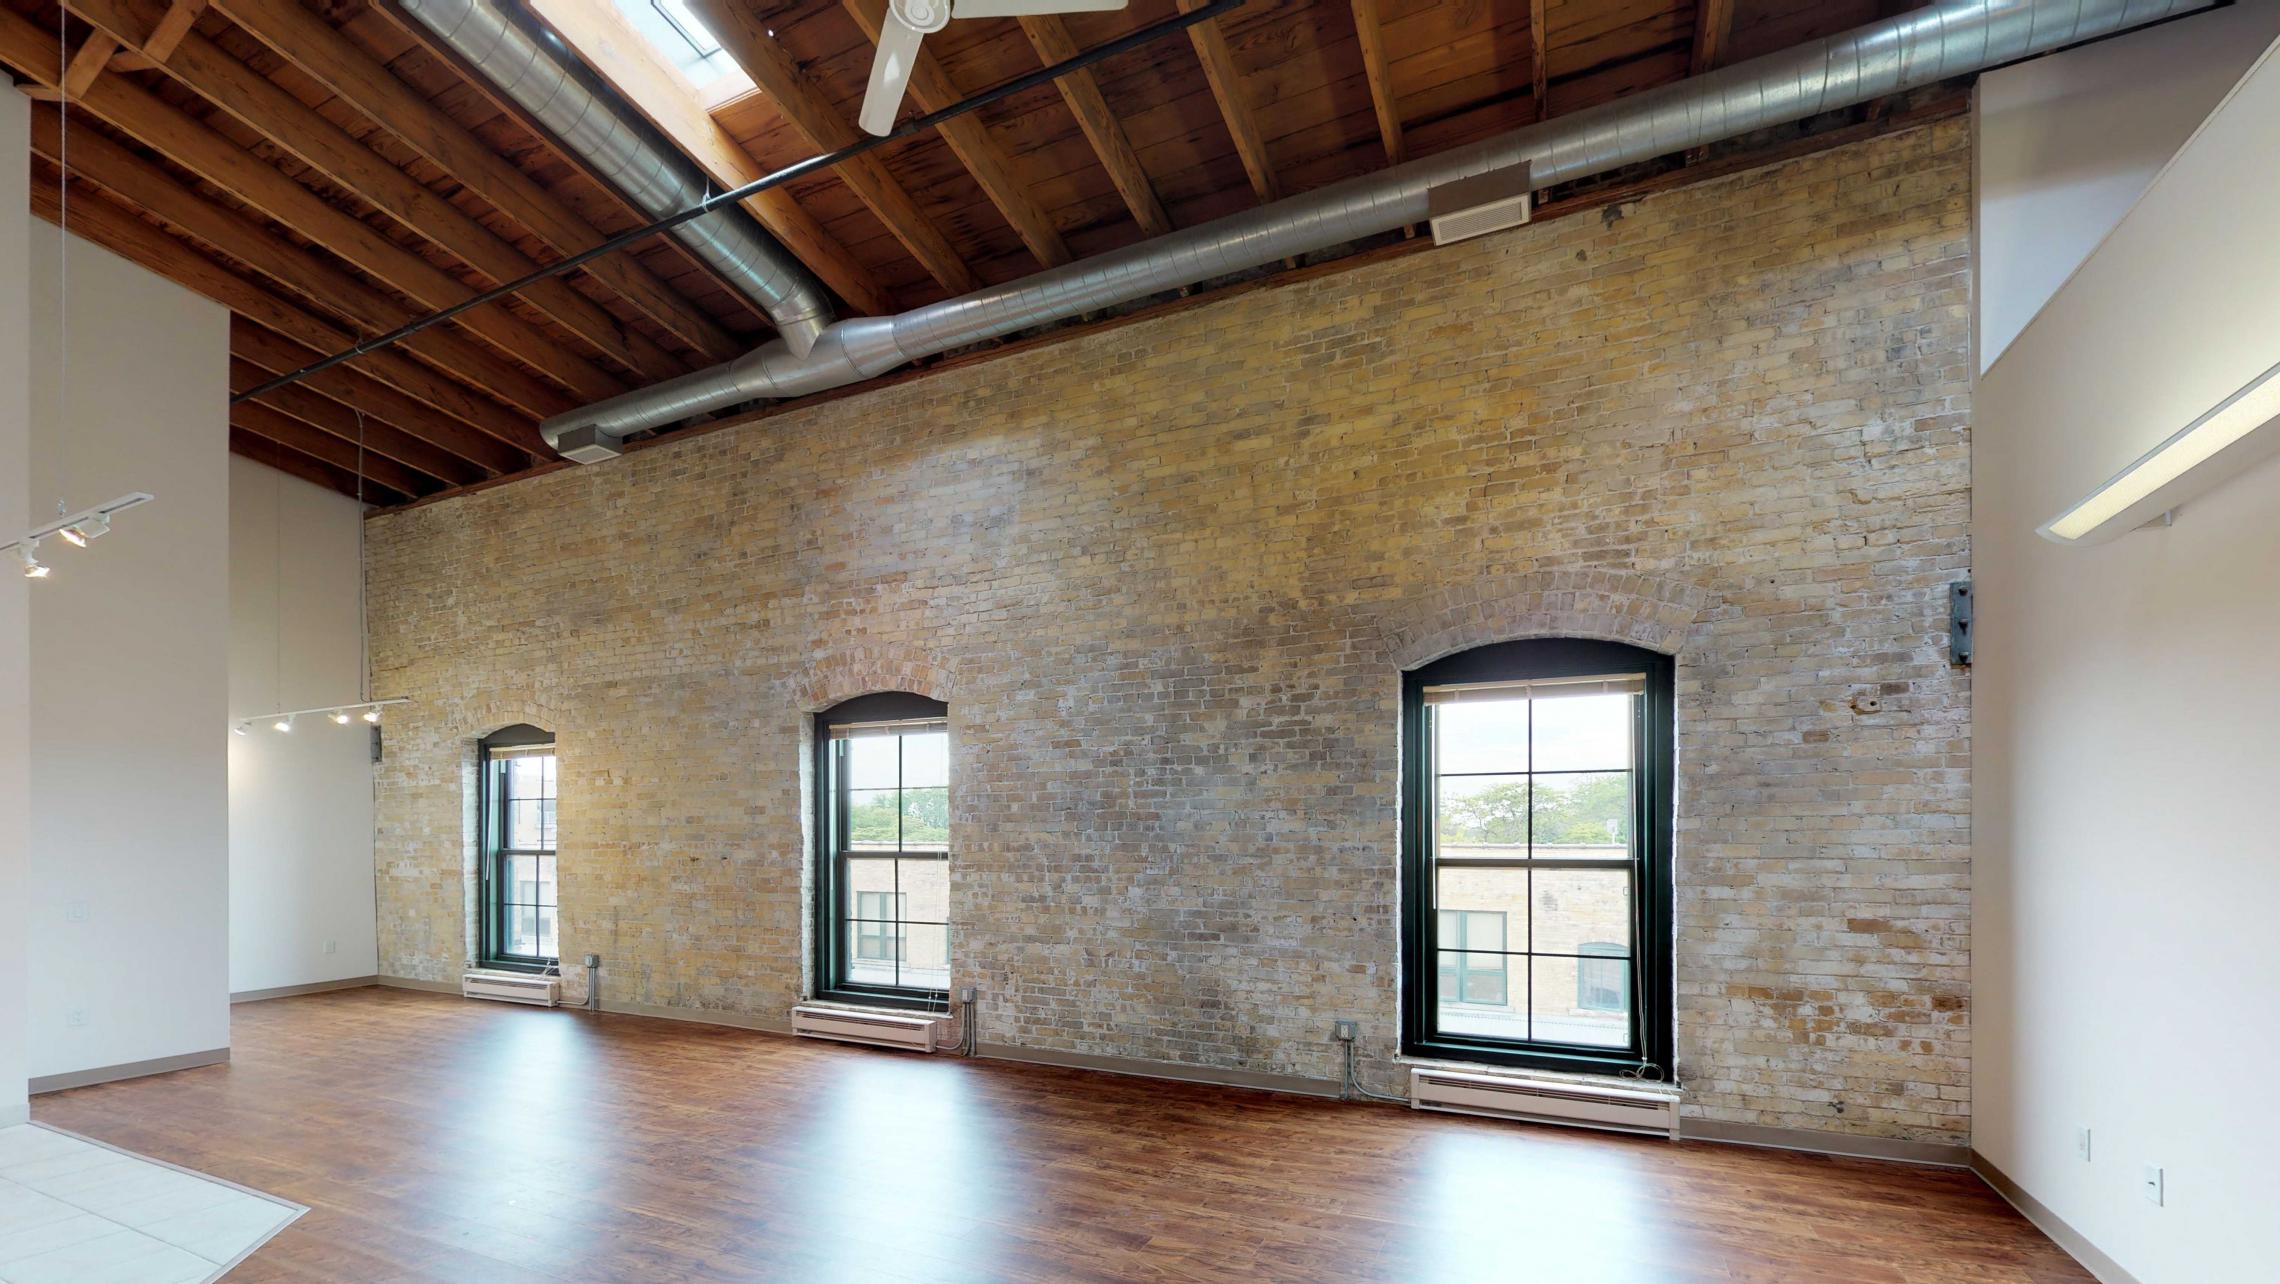 Tobacco-Lofts-Apartment-E306-Lofted-Two-Bedroom-Downtown-Madison-Exposures-Design-Historic-Yards